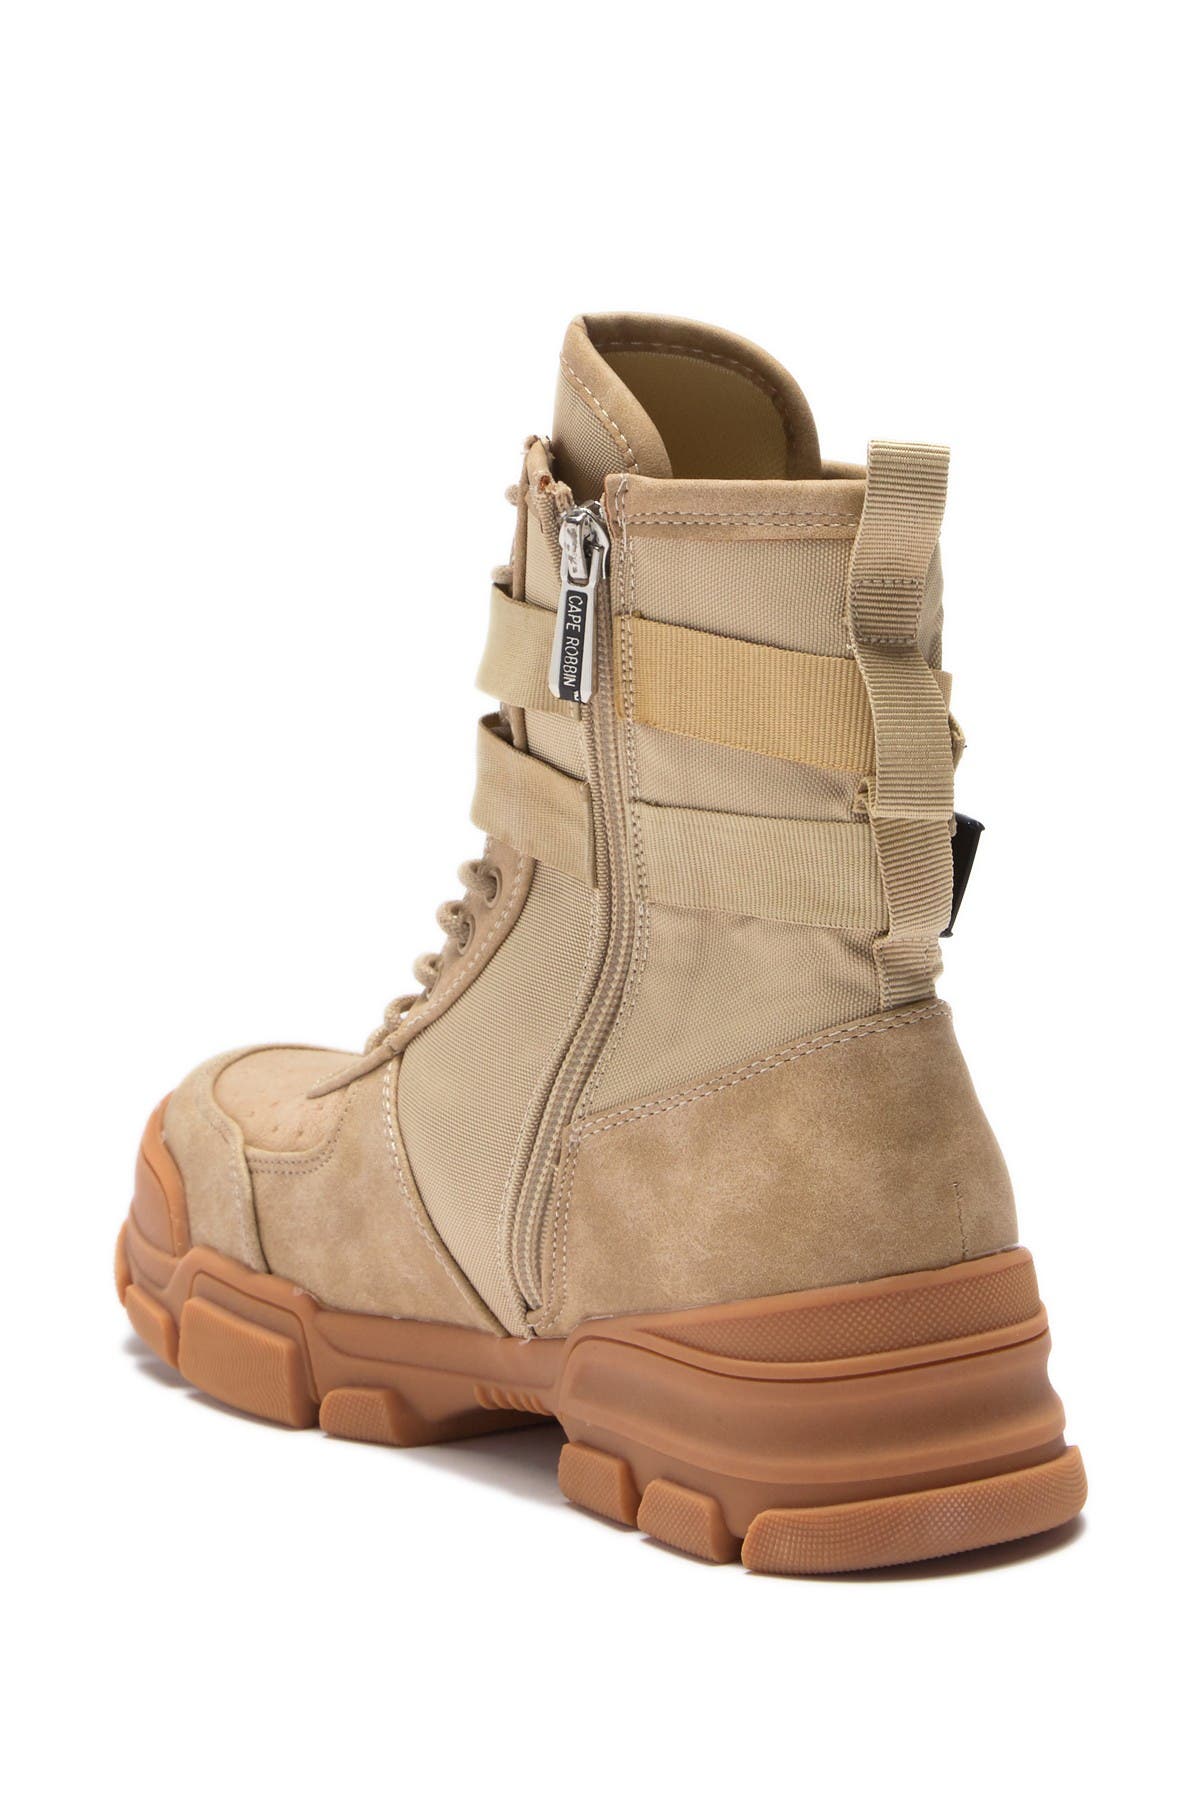 cape robbin utility lace up boot